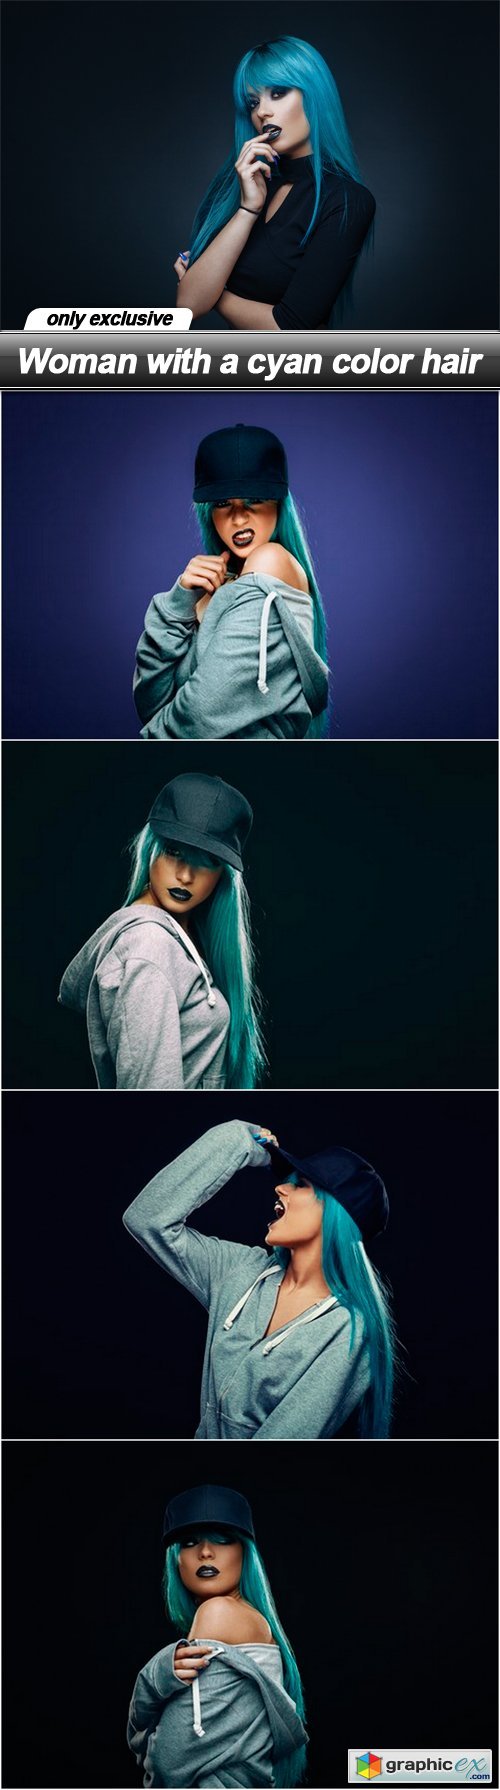 Woman with a cyan color hair - 5 UHQ JPEG